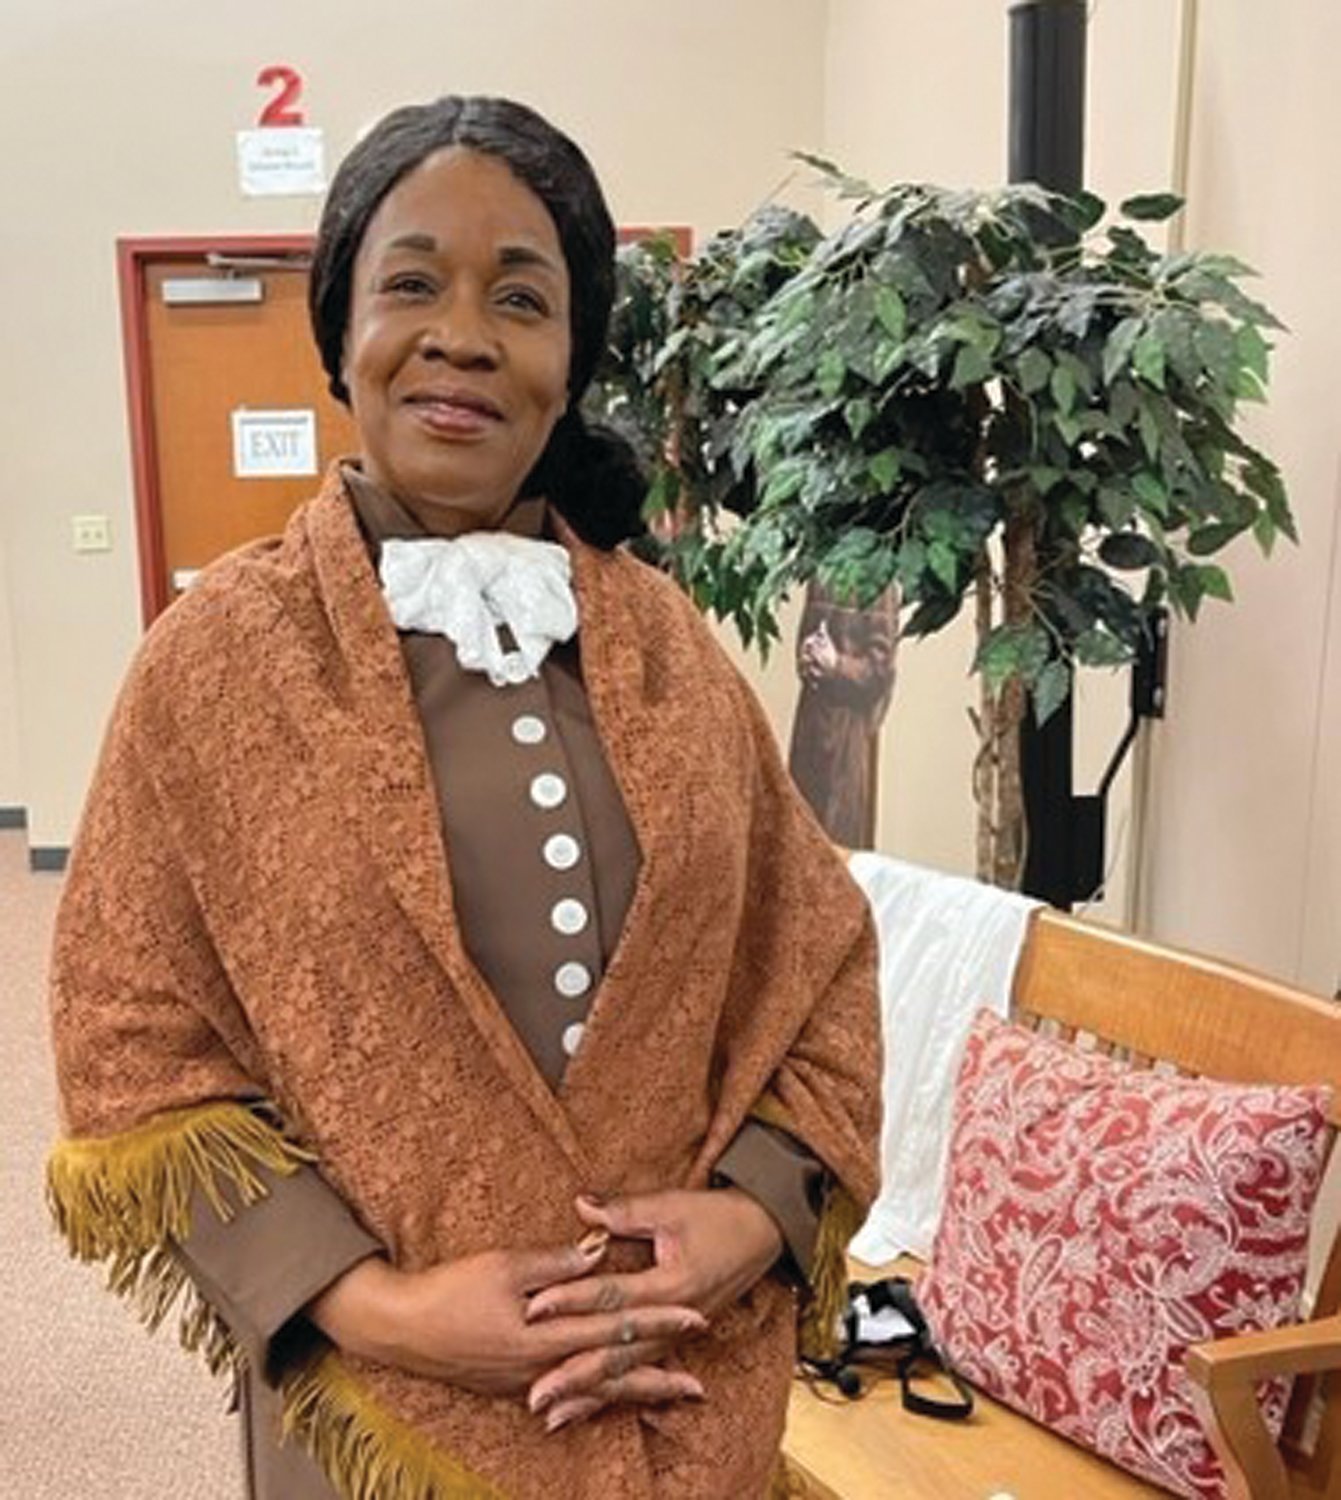 Shirley Lee Corsey of Yardley presents “Harriet Tubman—Live!” a historical reenactment documenting the life of the hero of the Underground Railroad.